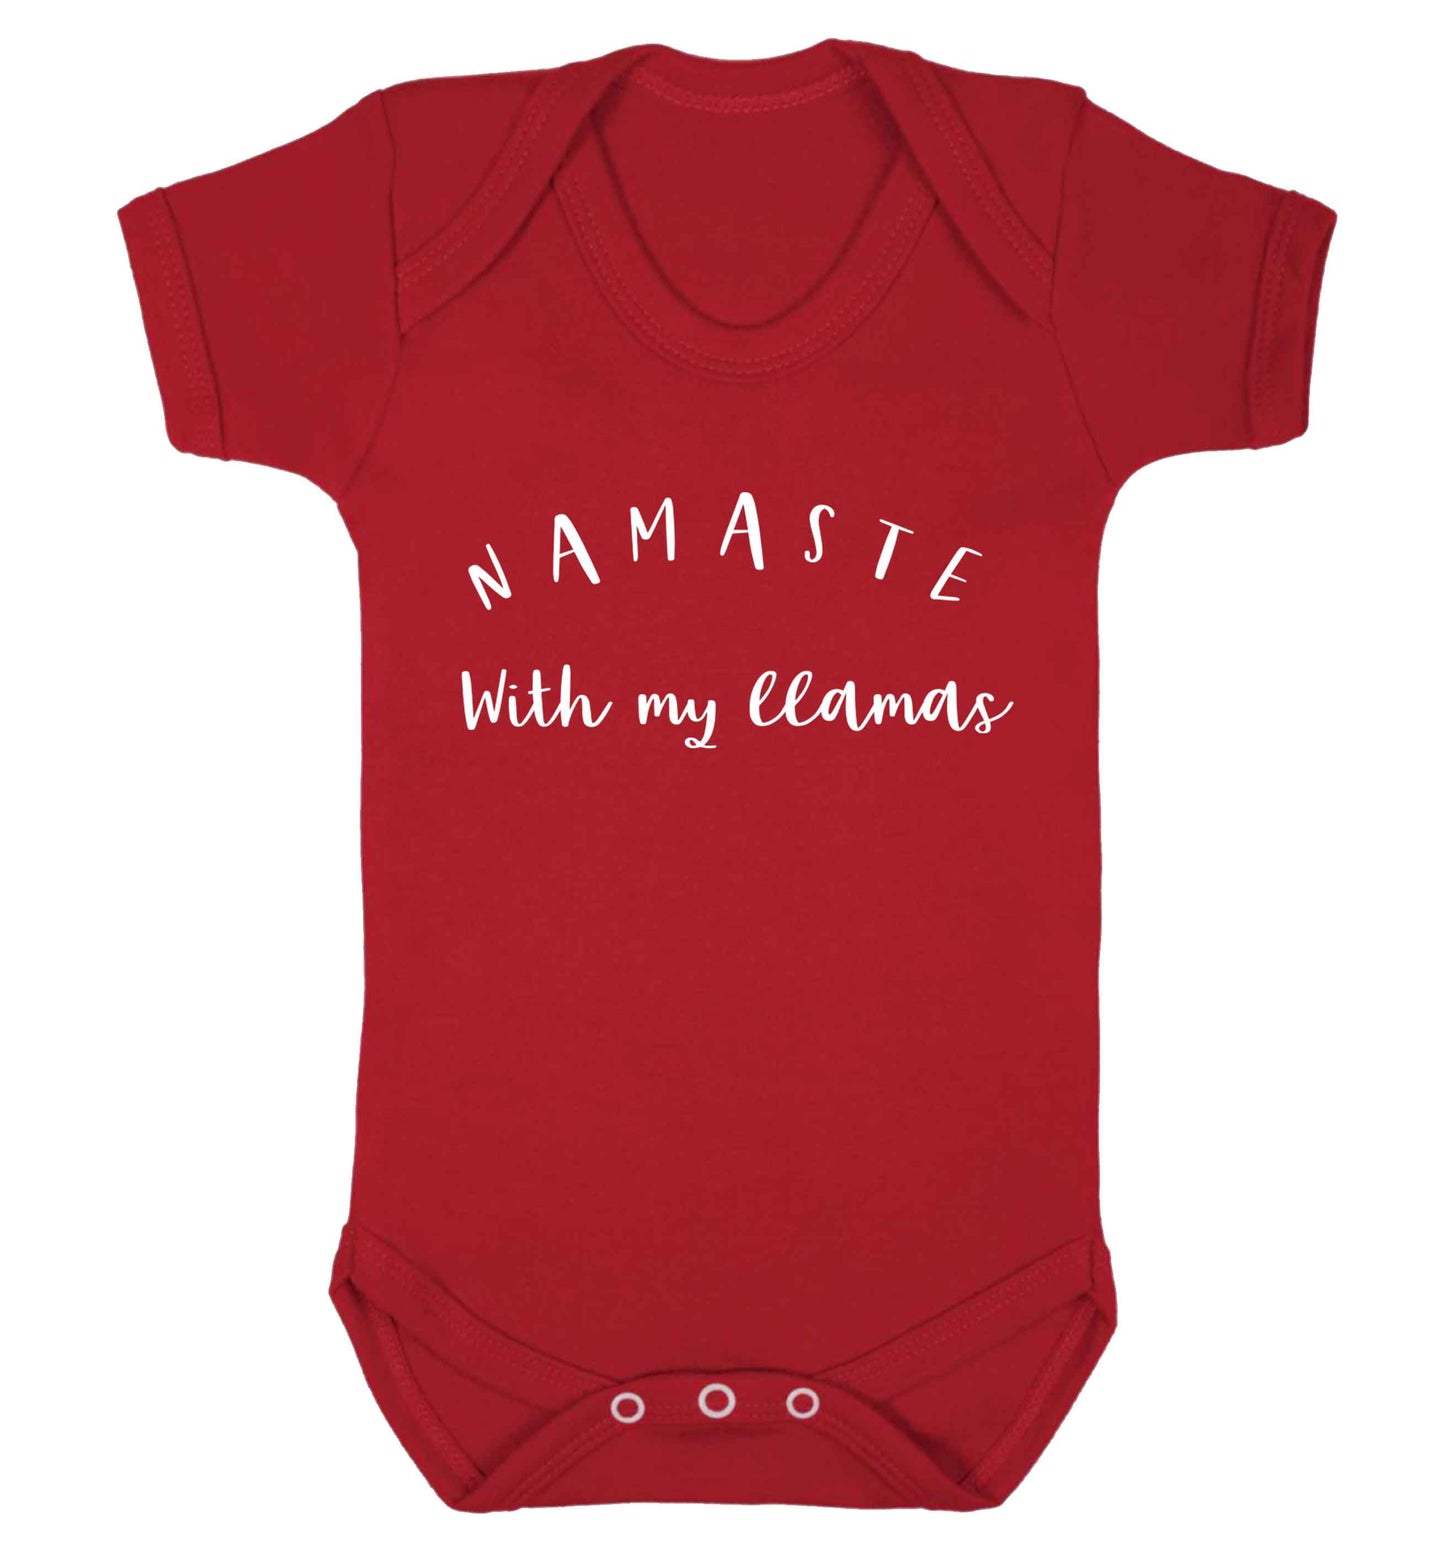 Namaste with my llamas Baby Vest red 18-24 months